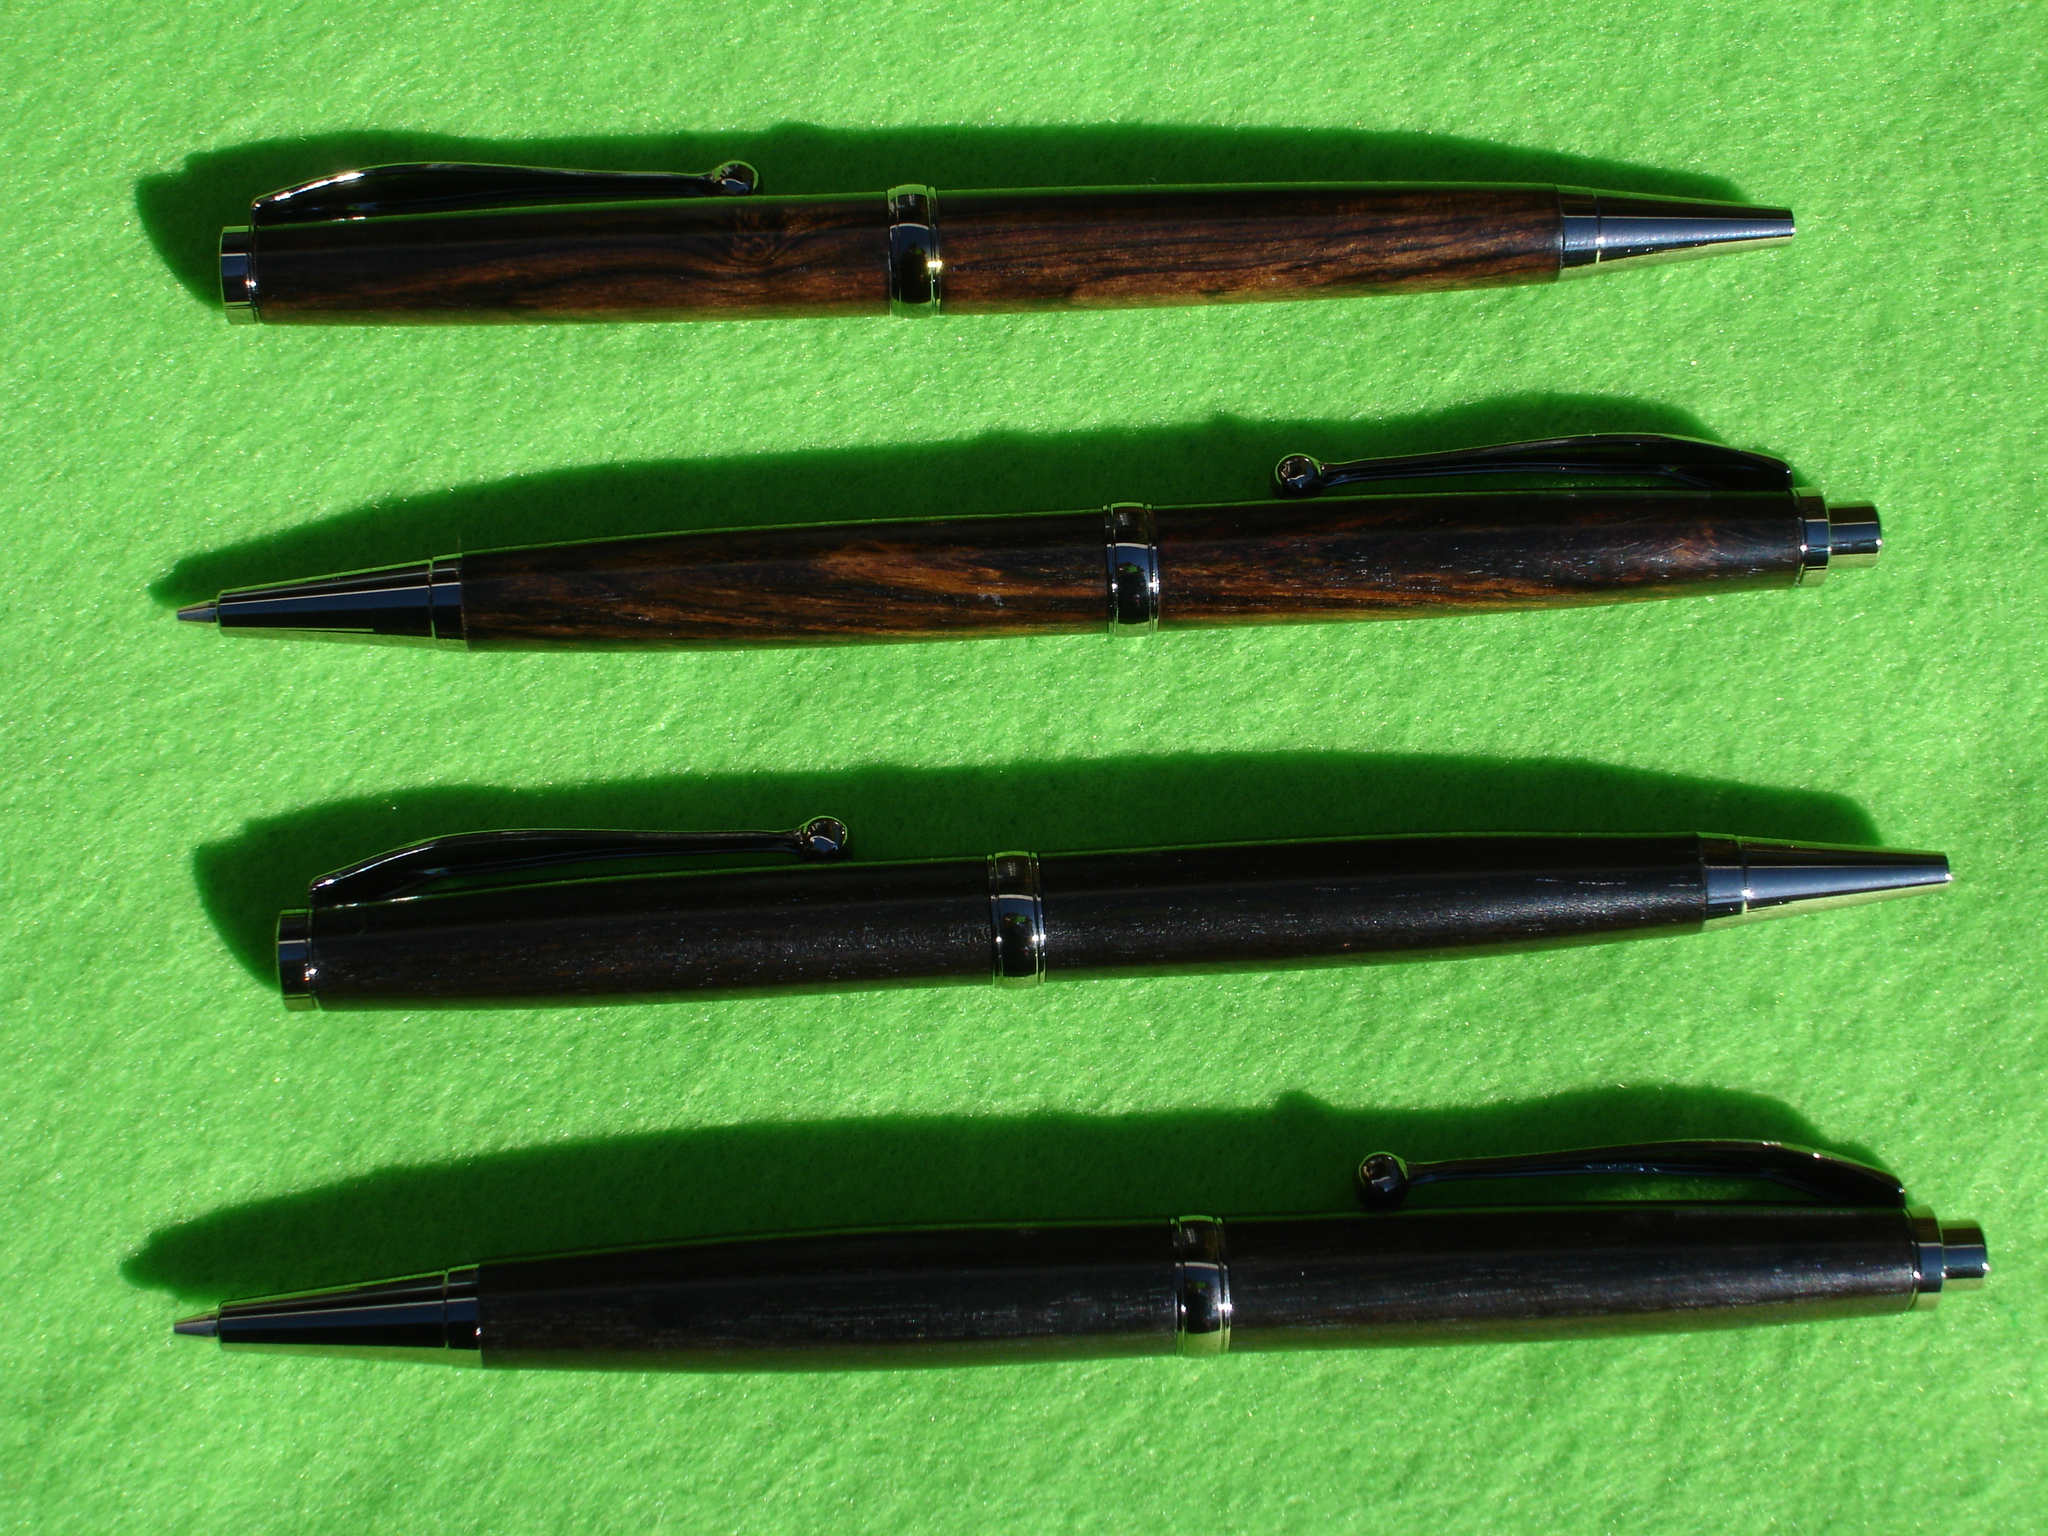 Comparing Two African Blackwood at Top with Two Madagascar Black Ebony at Bottom